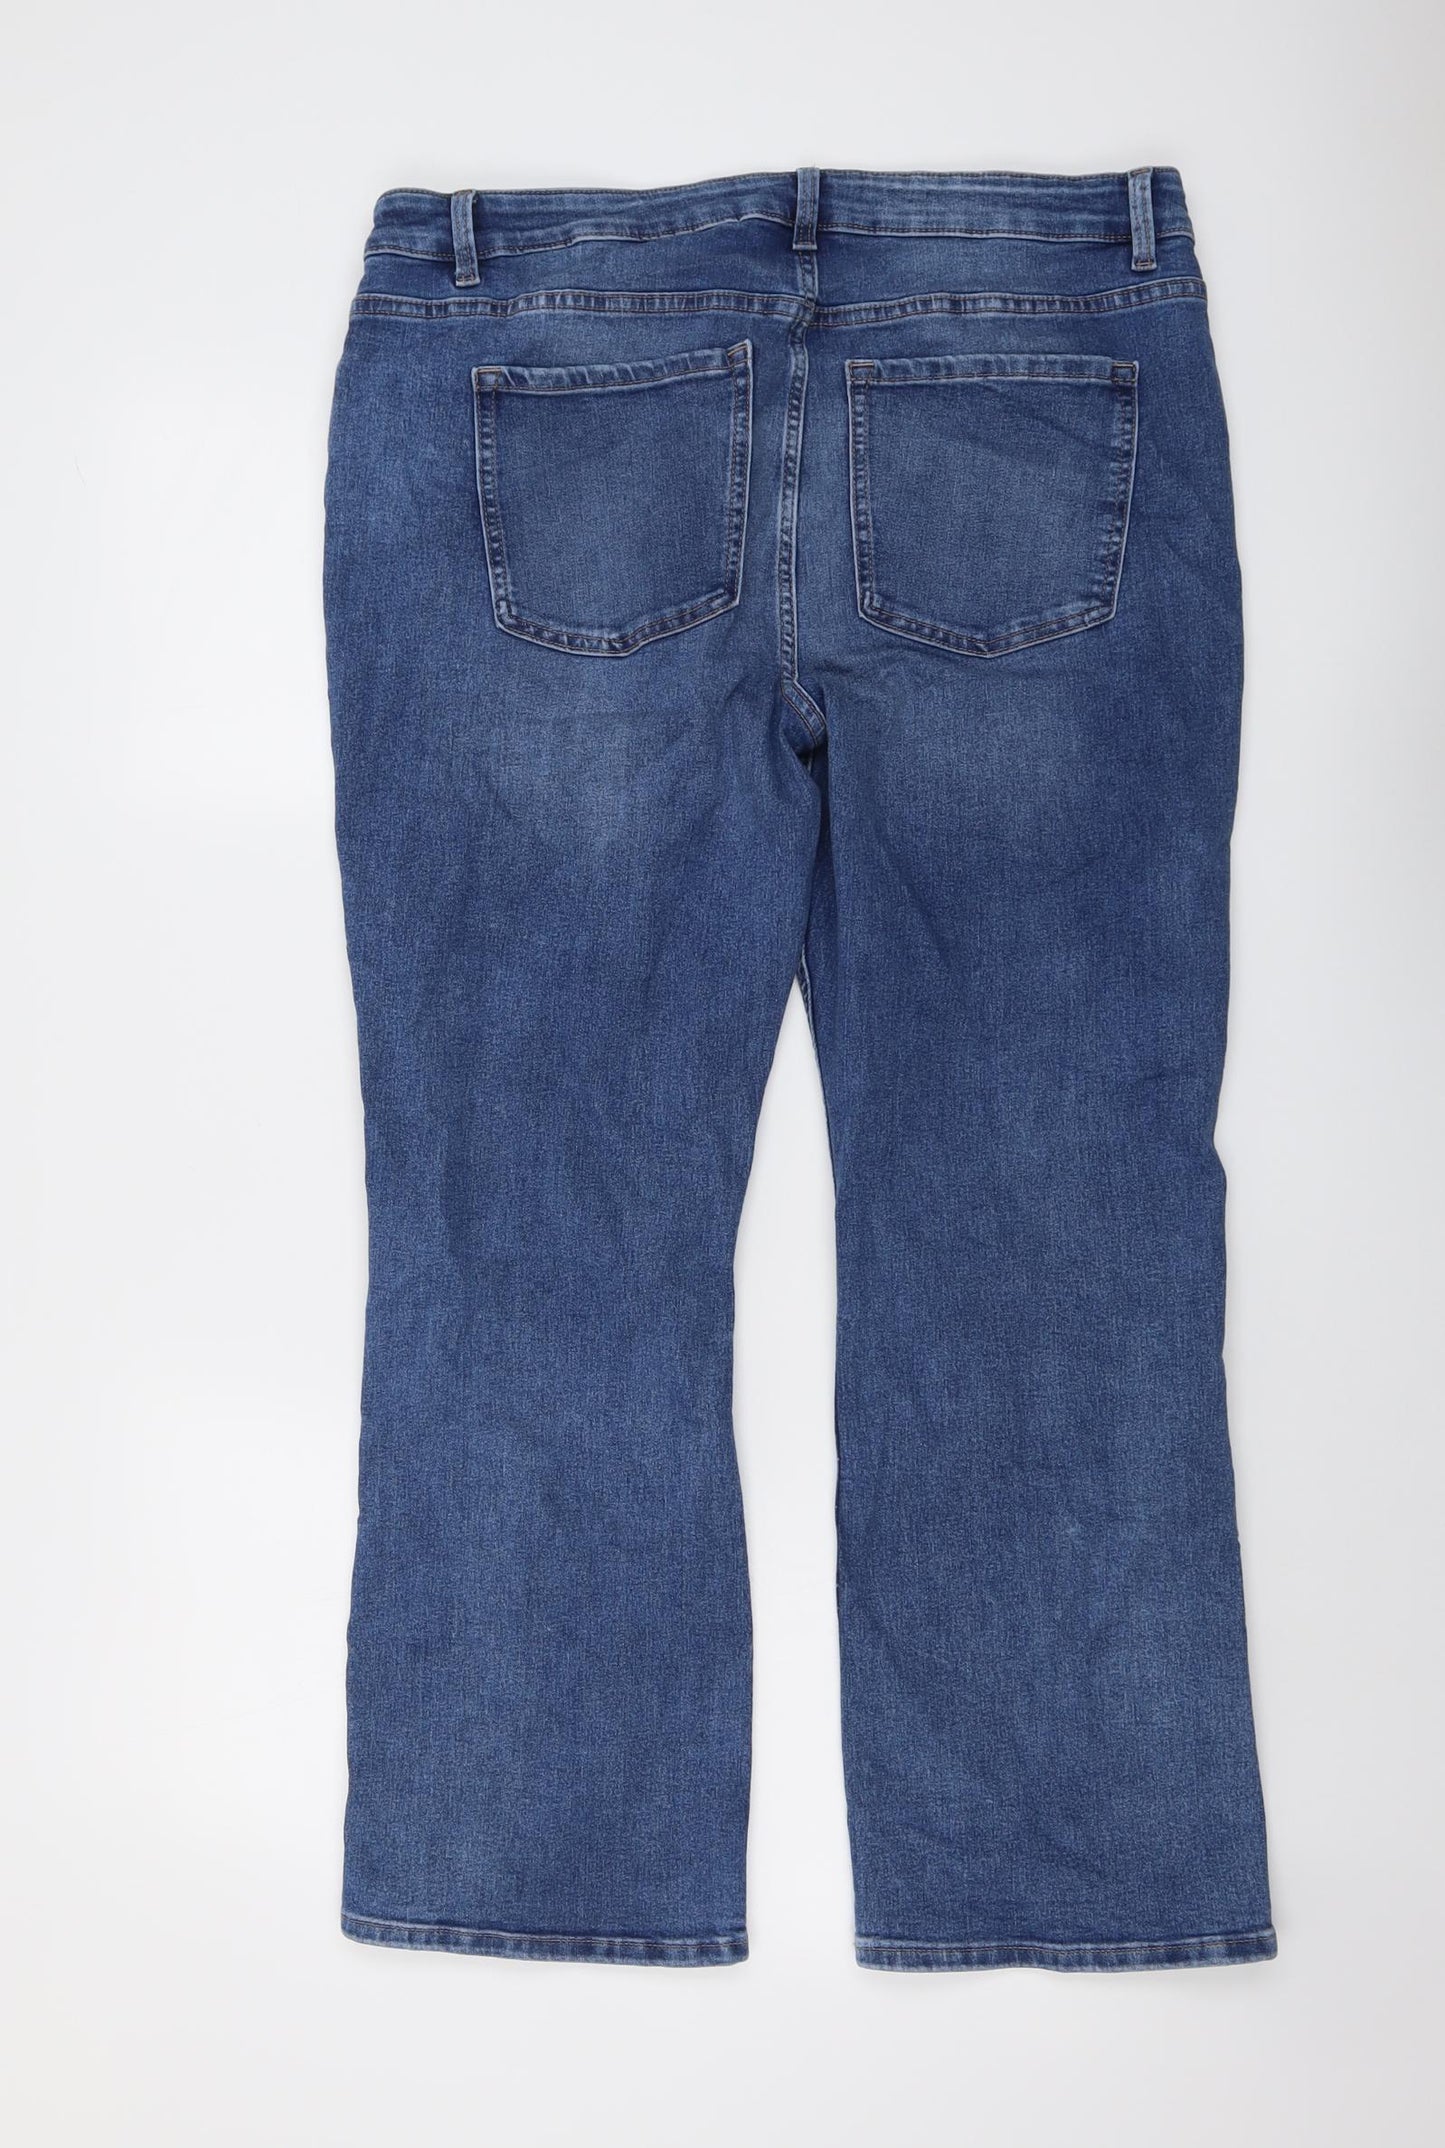 Marks and Spencer Womens Blue Cotton Bootcut Jeans Size 18 L27 in Regular Button